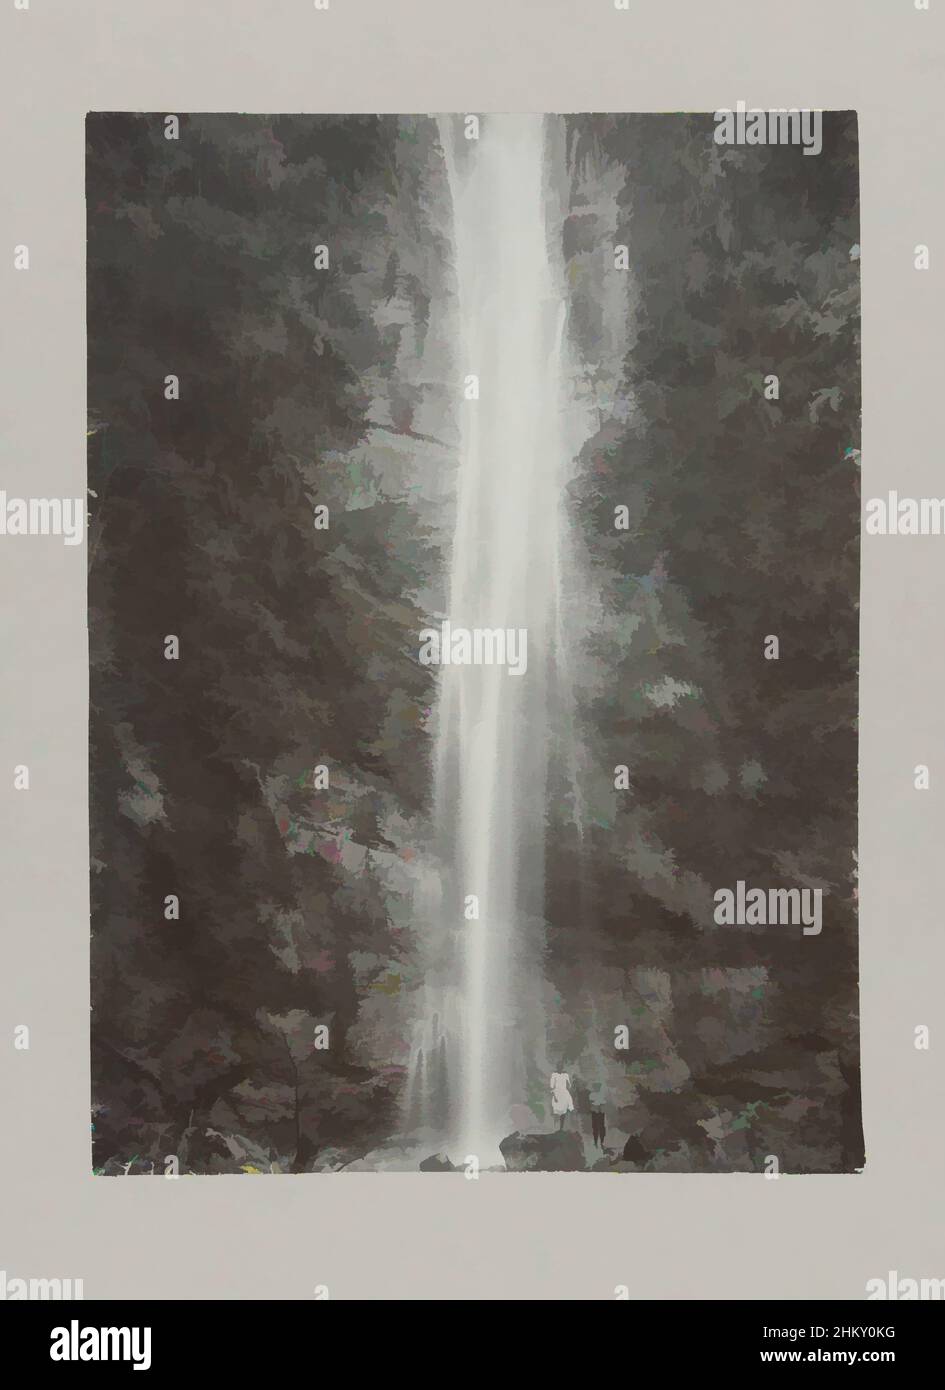 Art inspired by Waterfall near Soekaboemi on Java54. Waterfall b/ Soekaboemi, Waterfall near Soekaboemi, Java, Dutch East Indies, Buitenzorg, c. 1895 - c. 1915, photographic support, paper, gelatin silver print, height 231 mm × width 168 mmheight 243 mm × width 329 mm, Classic works modernized by Artotop with a splash of modernity. Shapes, color and value, eye-catching visual impact on art. Emotions through freedom of artworks in a contemporary way. A timeless message pursuing a wildly creative new direction. Artists turning to the digital medium and creating the Artotop NFT Stock Photo